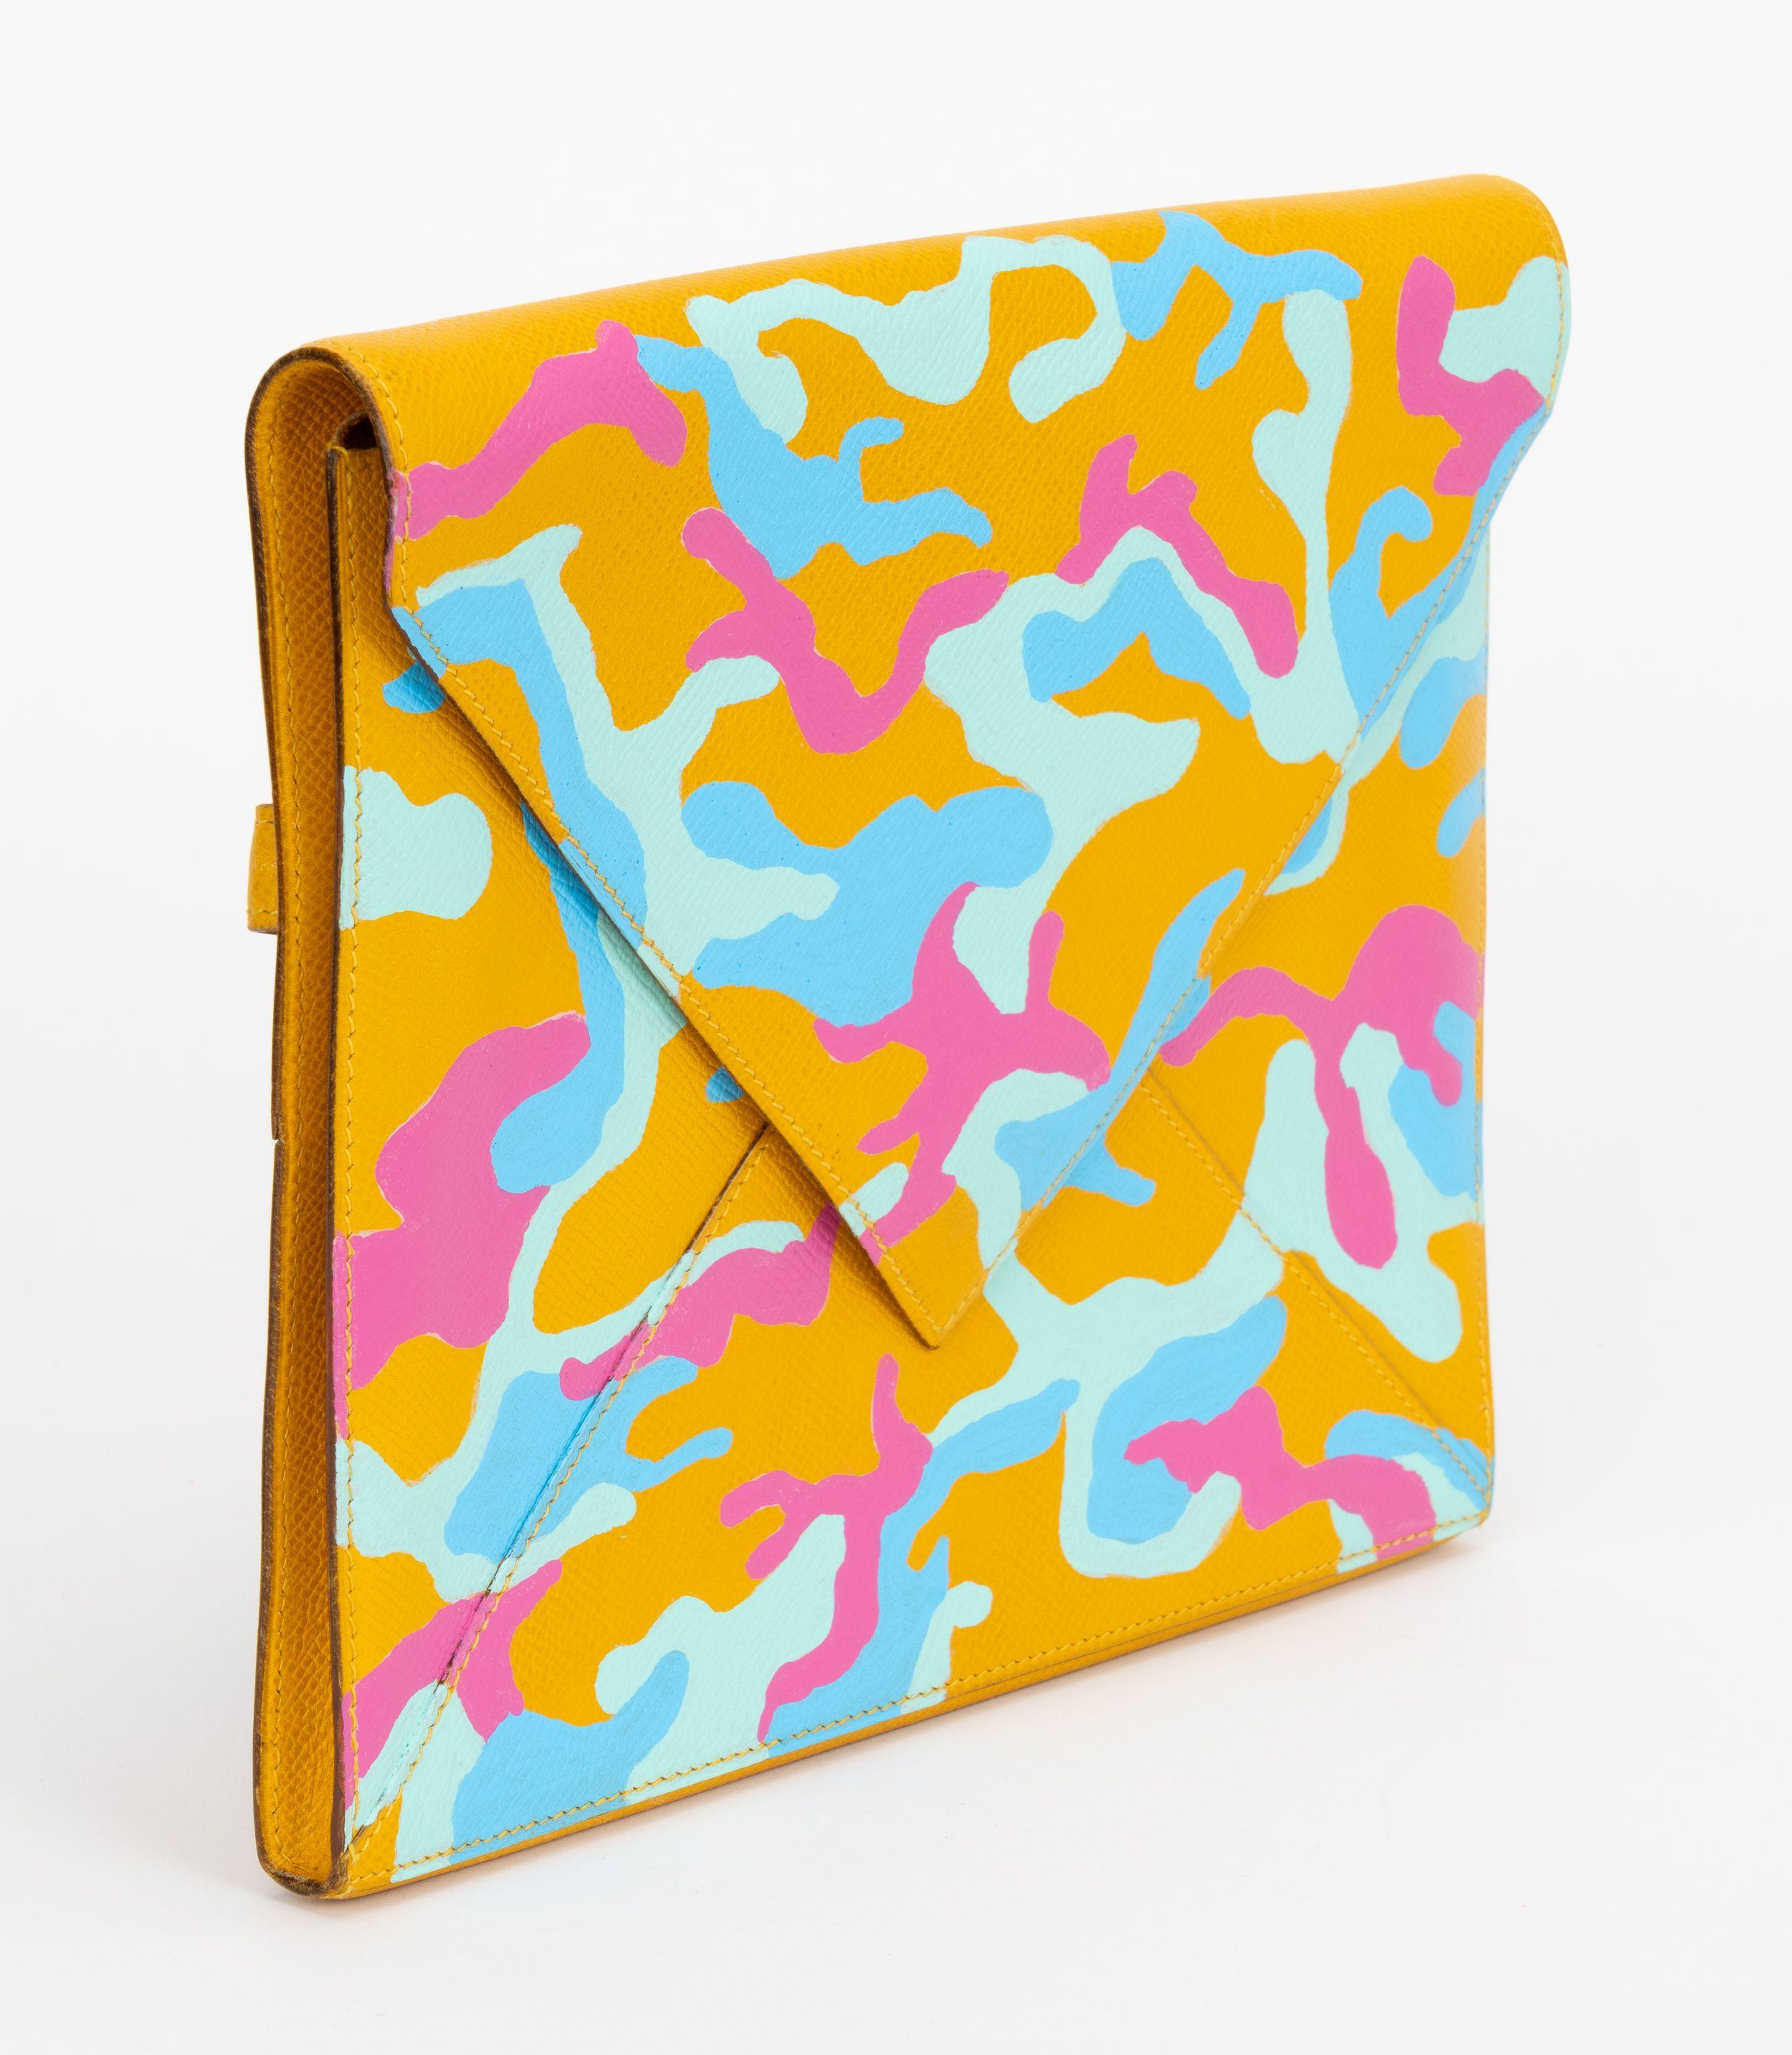 Hermès vintage jaune soleil clutch hand painted by US artist with pastel colors camouflage design. One of a kind piece, unusual back strap to hold the clutch. 
Date stamp T in a circle. Comes with original dust cover.